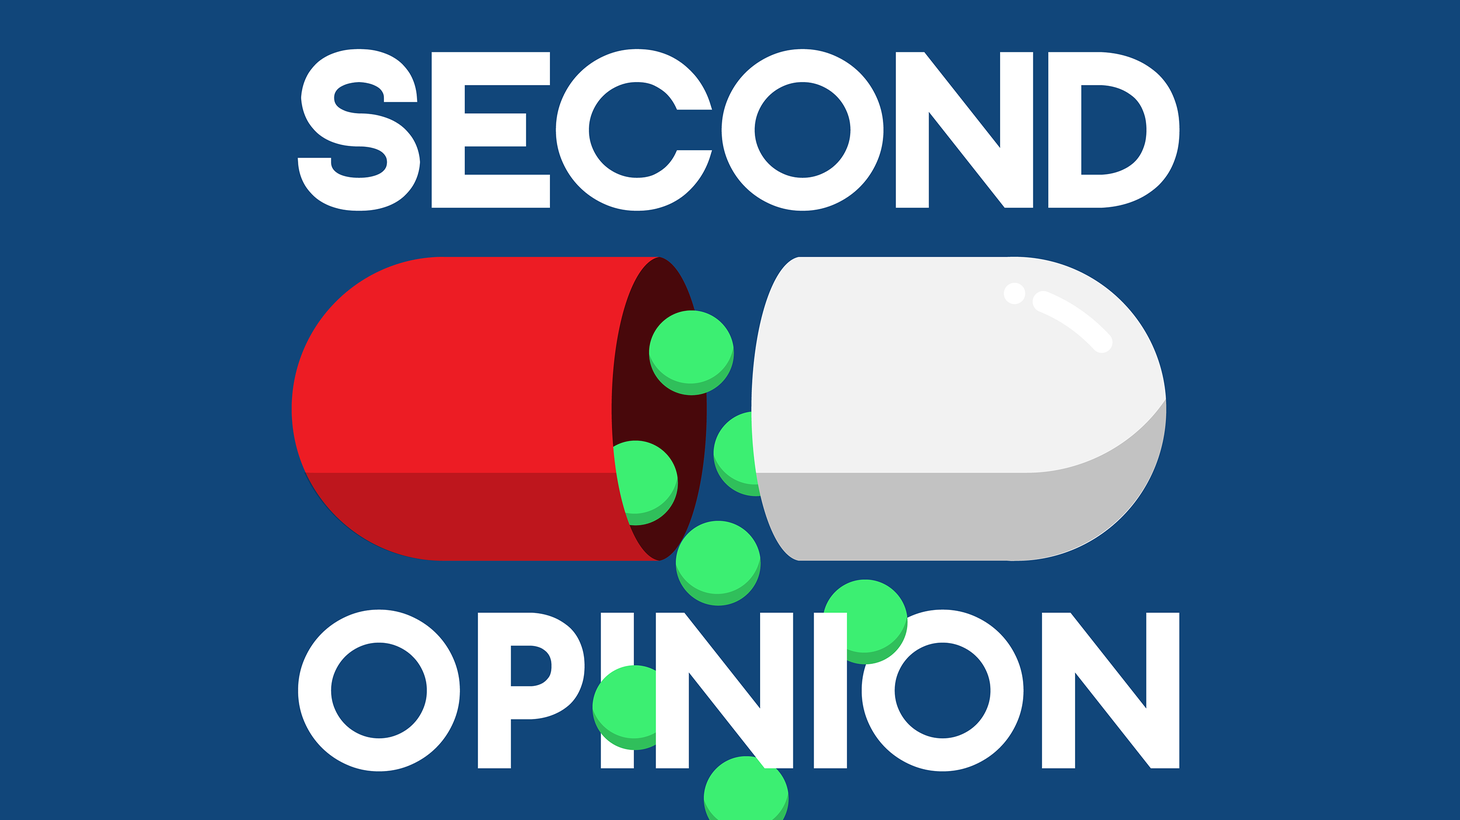 Why aren’t patients given useful information on the effectiveness of medications?